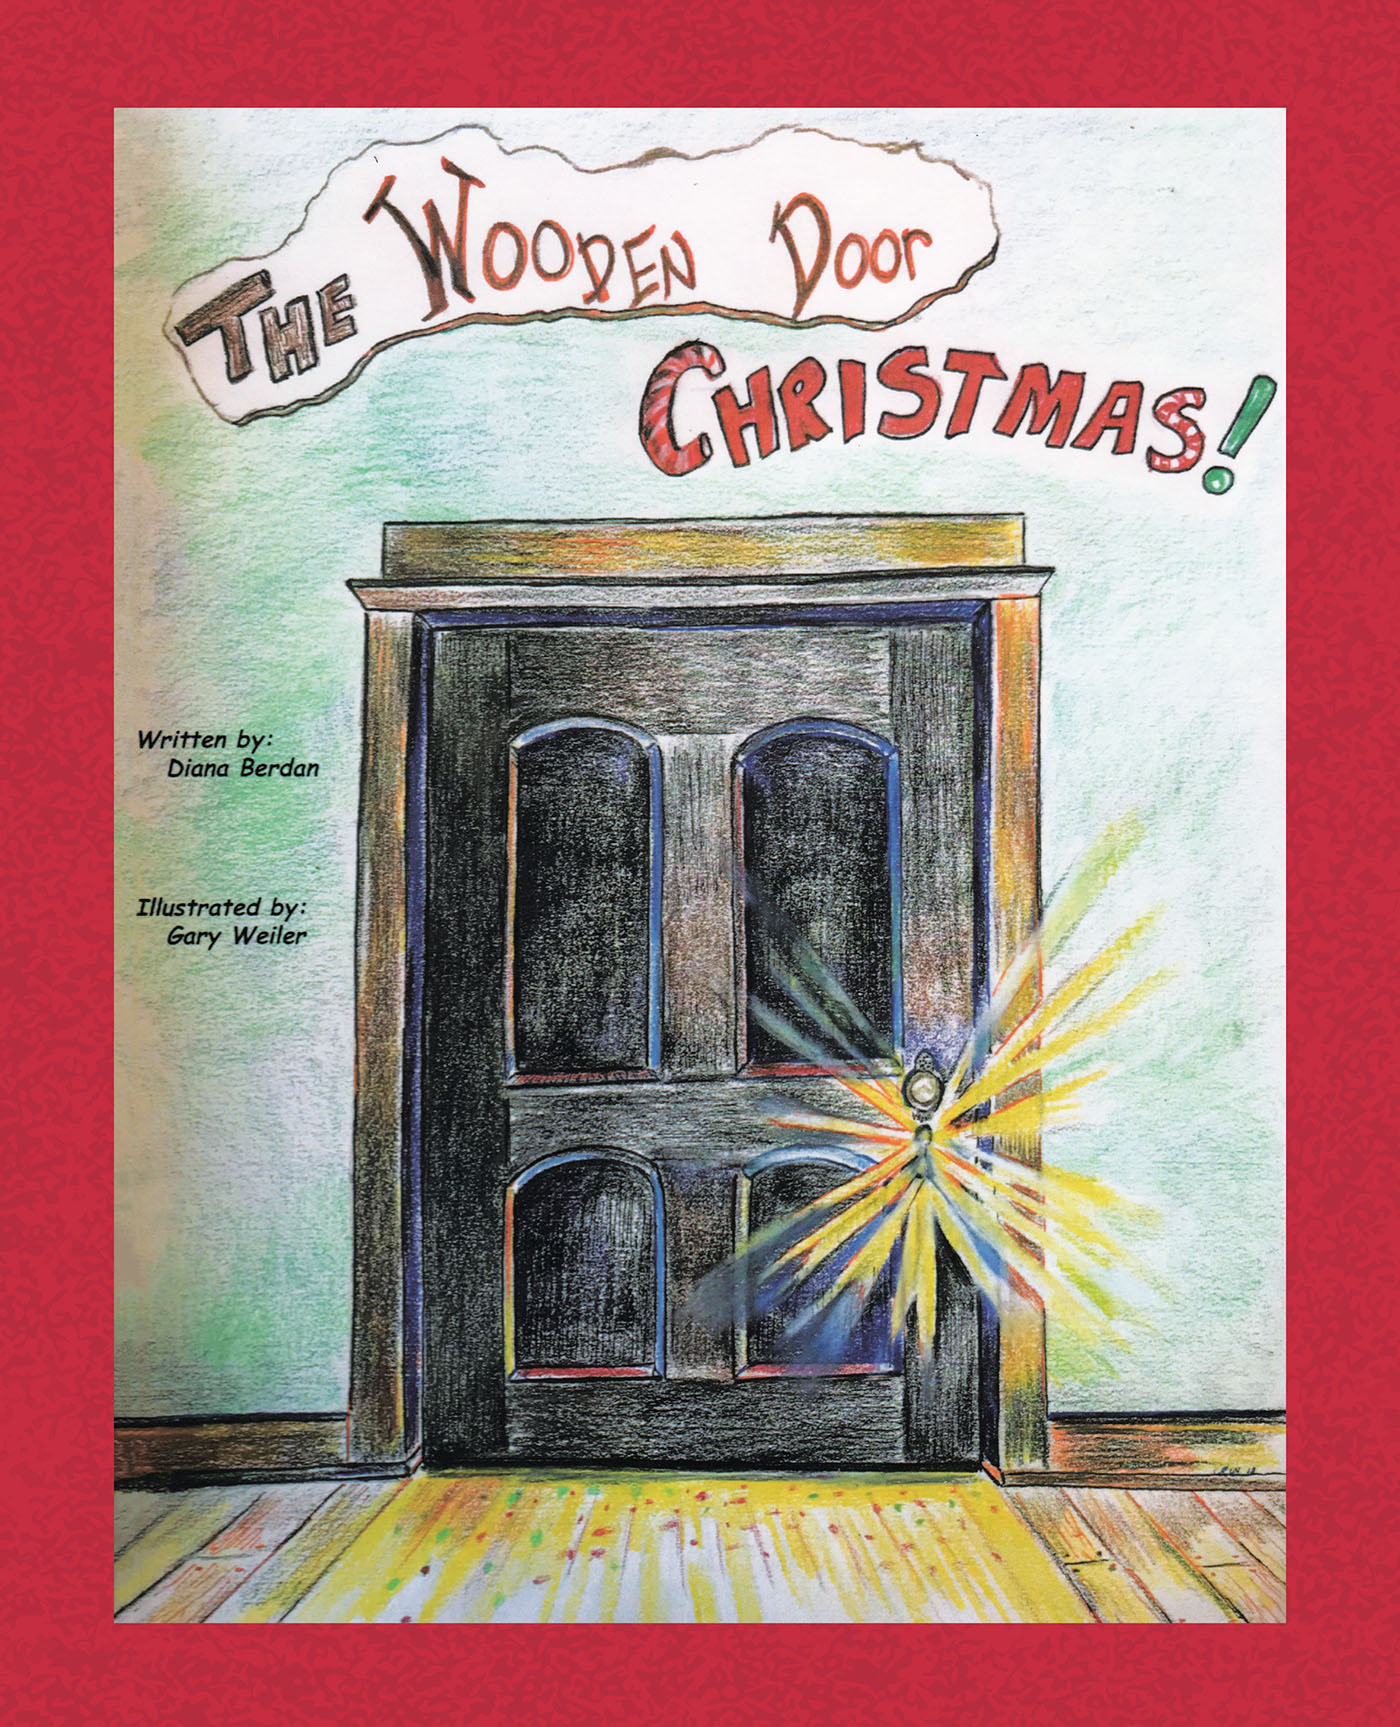 The Wooden Door Christmas Cover Image